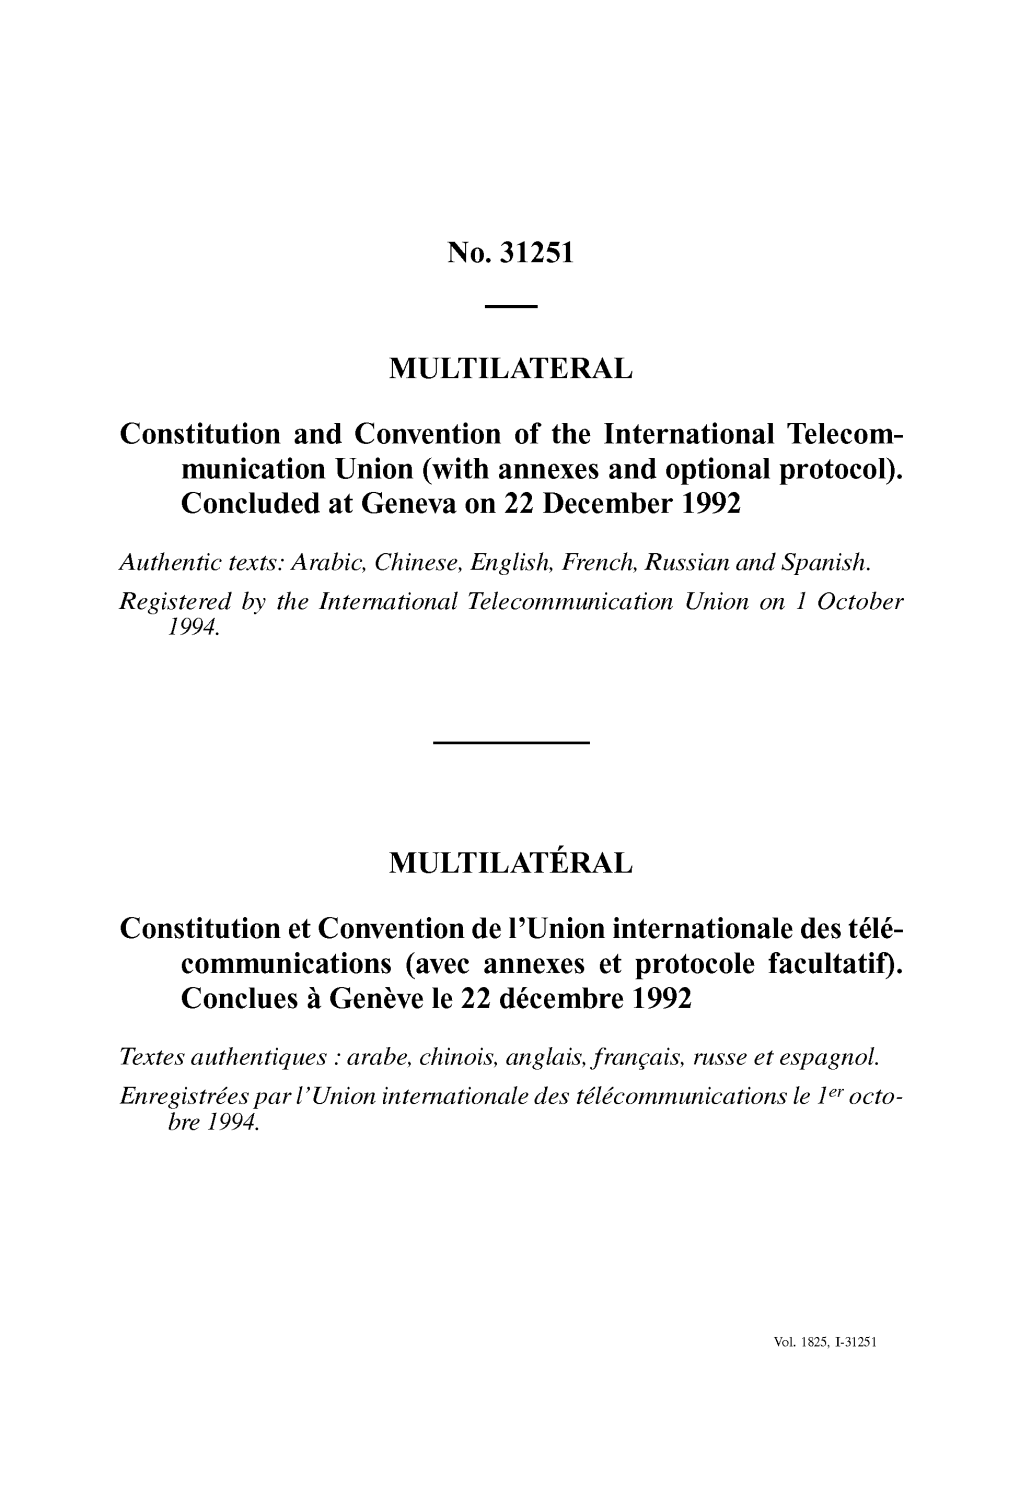 No. 31251 MULTILATERAL Constitution and Convention of The